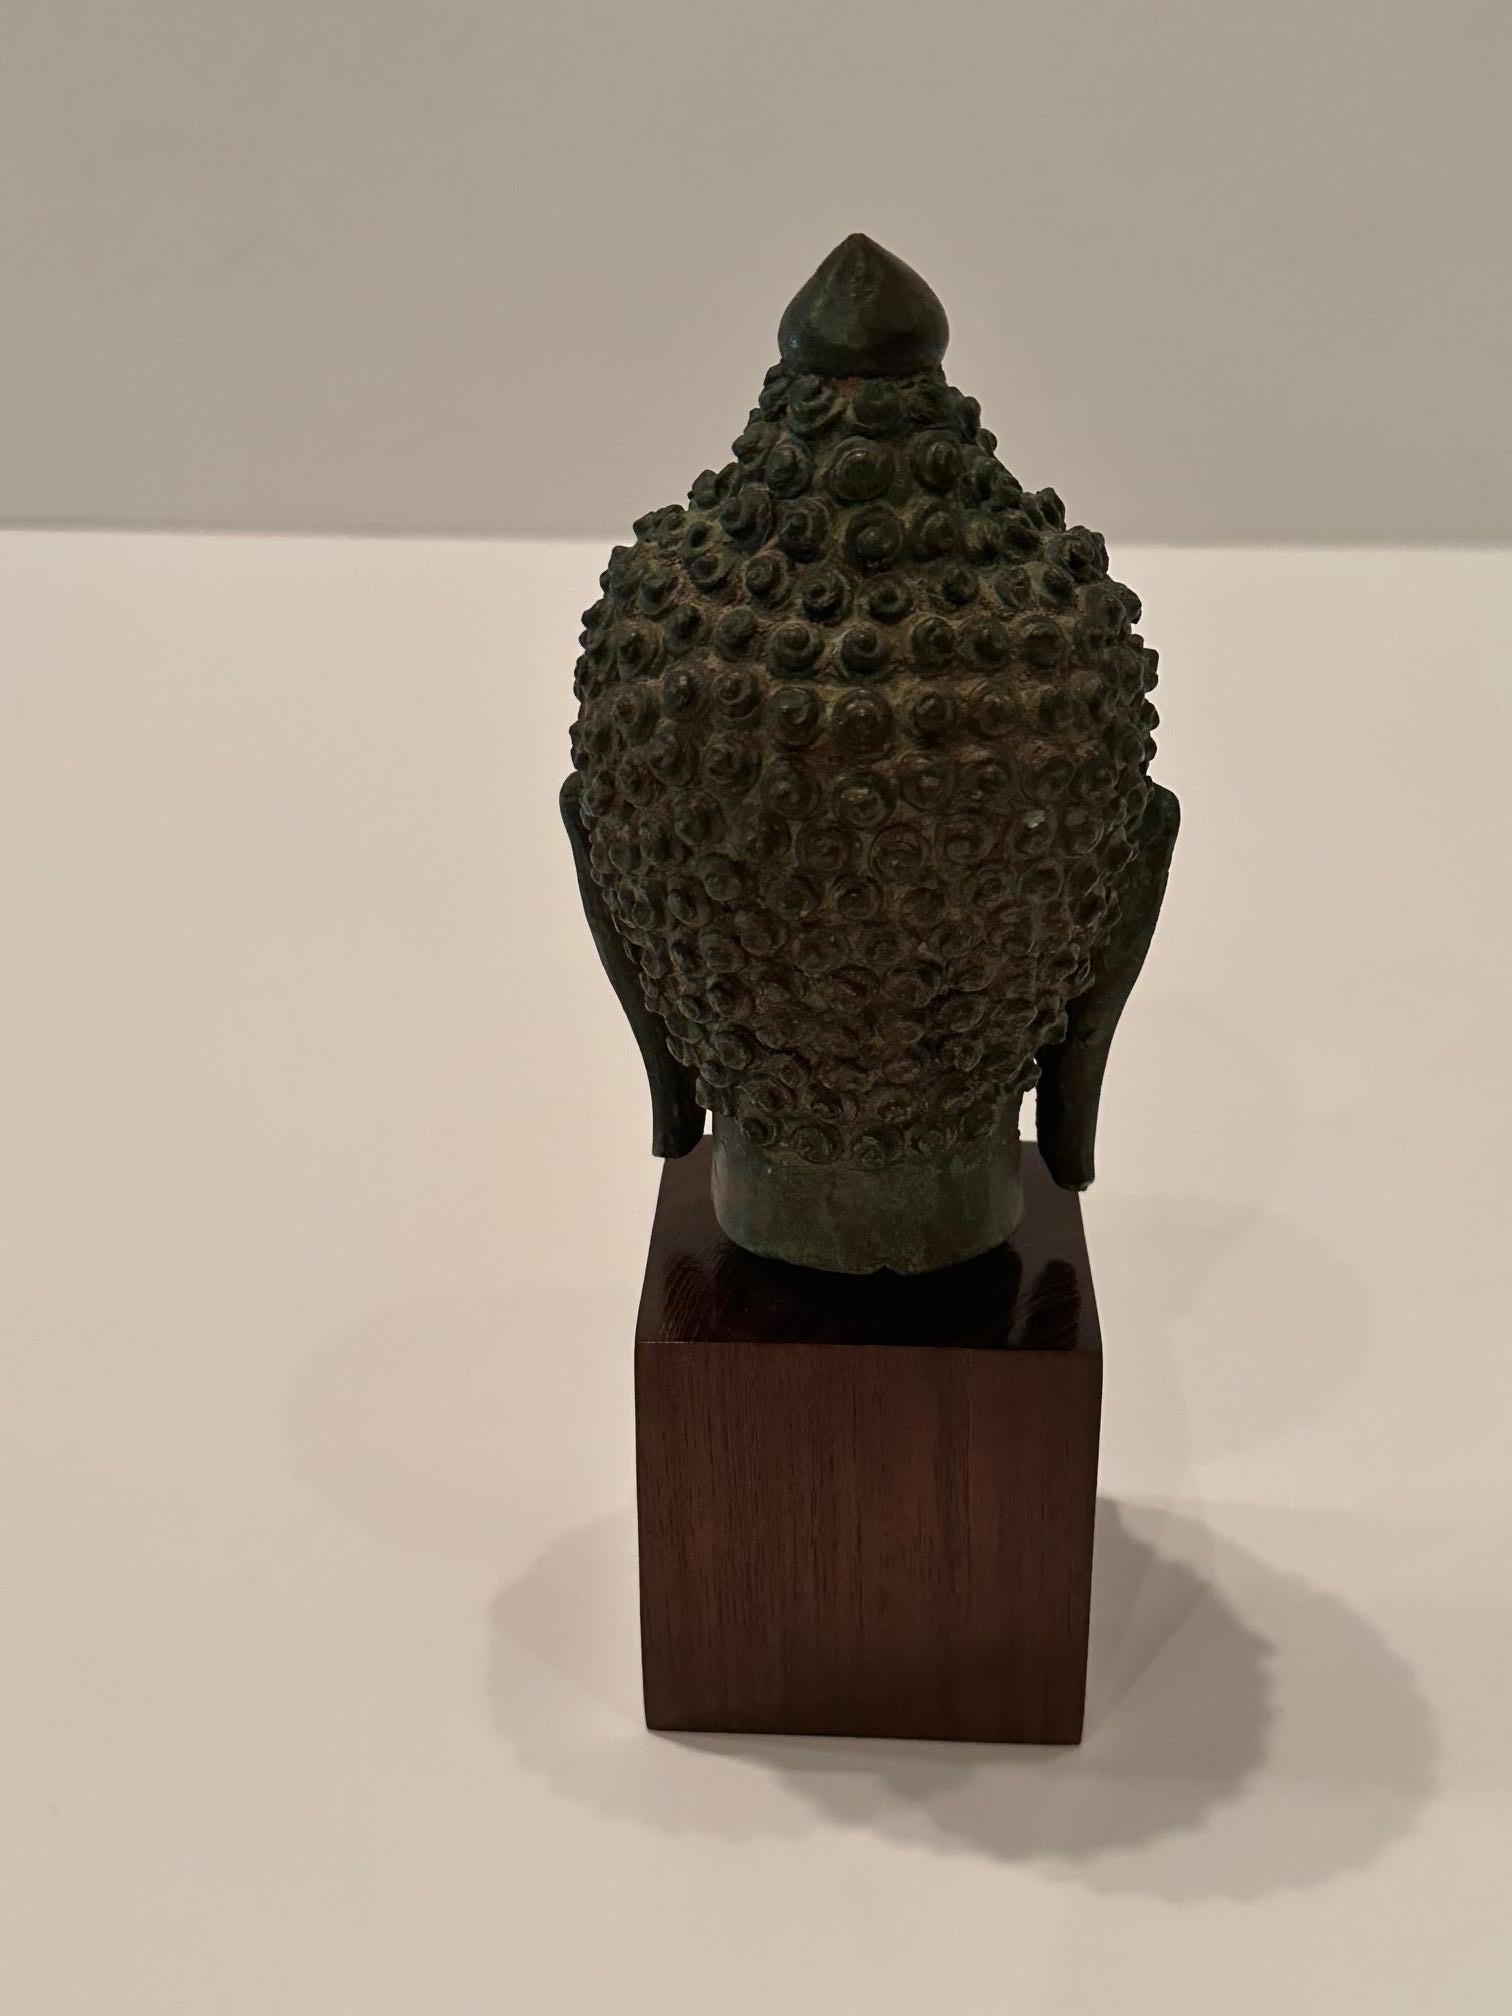 Ethereal Small Thai Bronze Buddha Head Sculpture For Sale 1